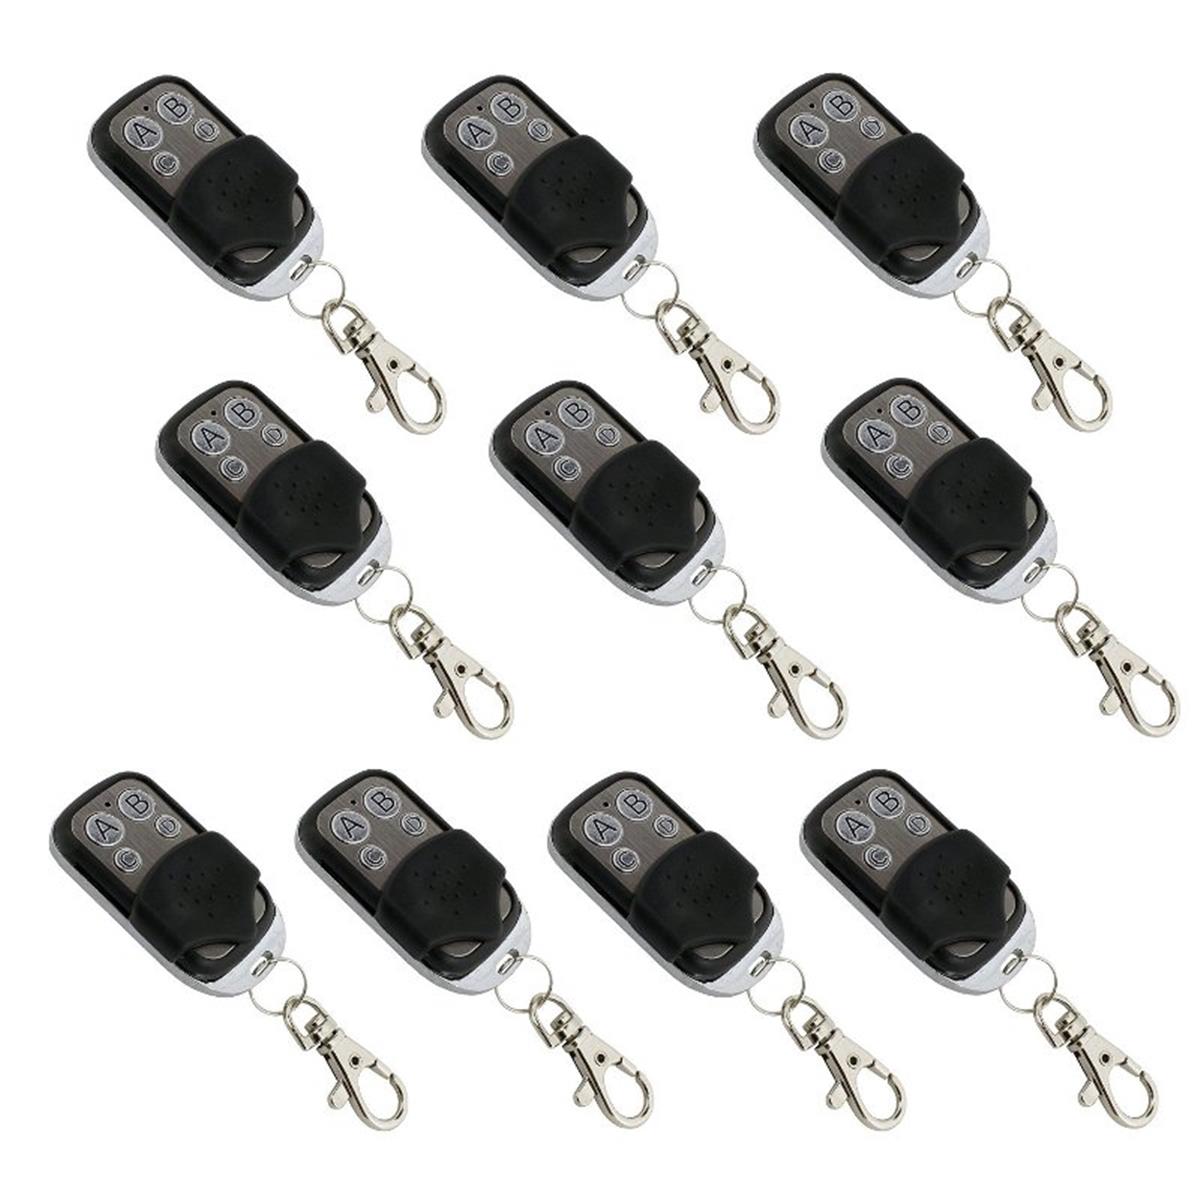 10LM124-UNB Remote Control for Gate Opener 4-Channel Remote Transmitter - Lot of 10 -  ALEKO